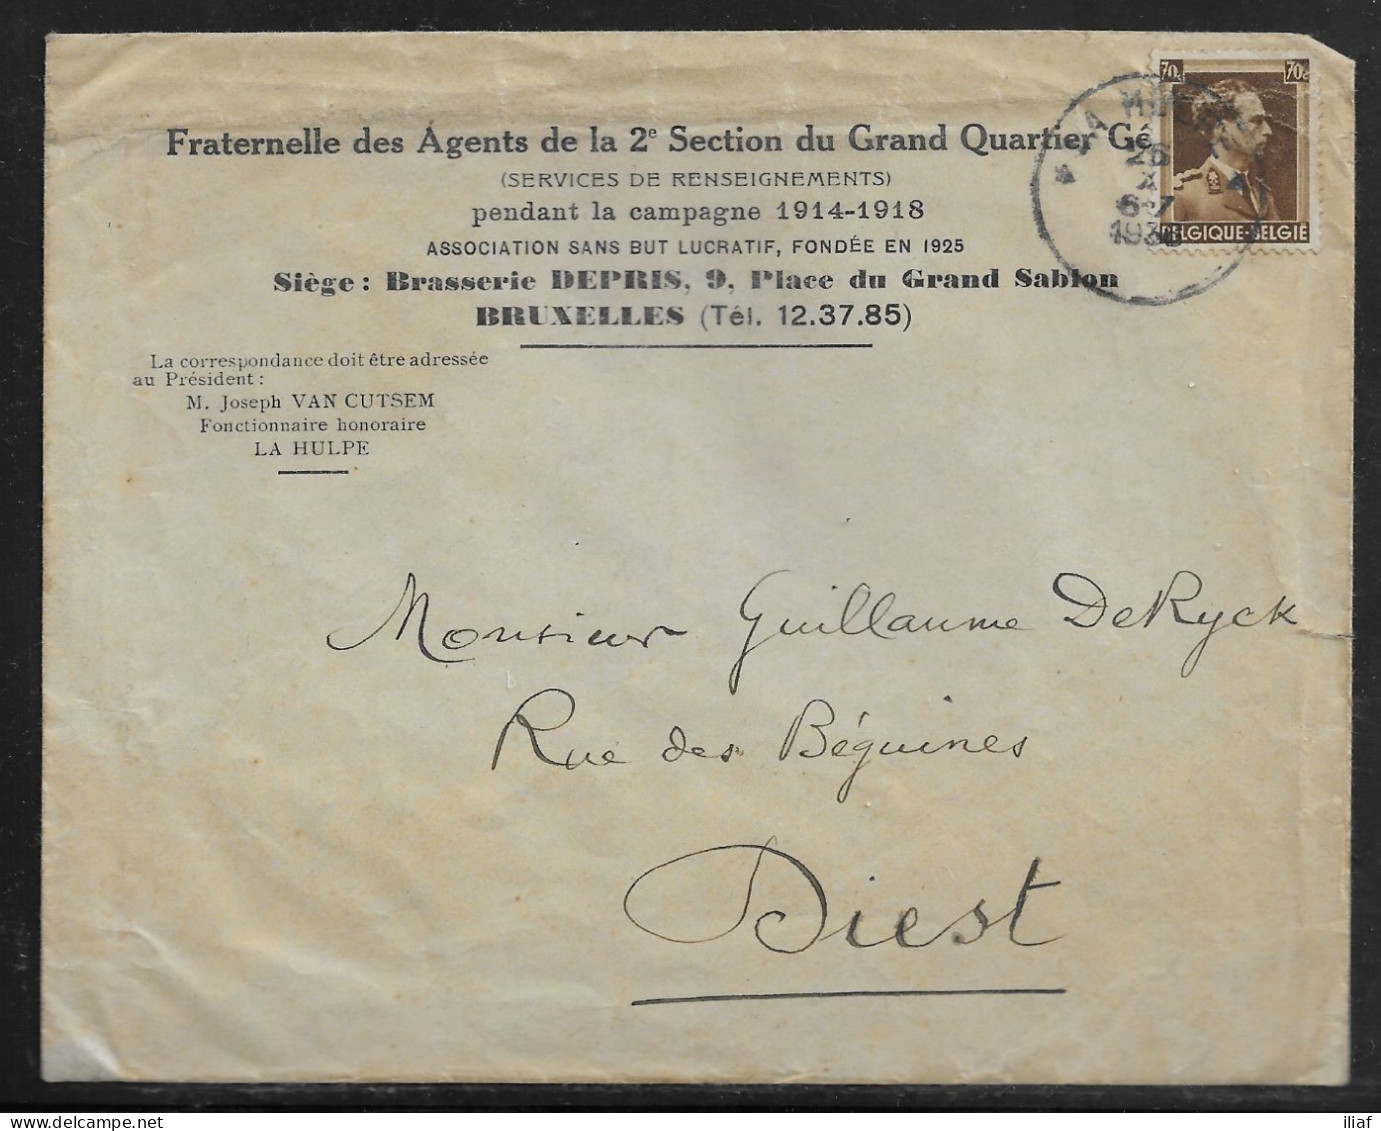 Belgium. Stamp Sc. 283 On Commercial Letter, Sent From La Hulpe On 25.10.1936 For Diest Belgium - 1936-1957 Collar Abierto